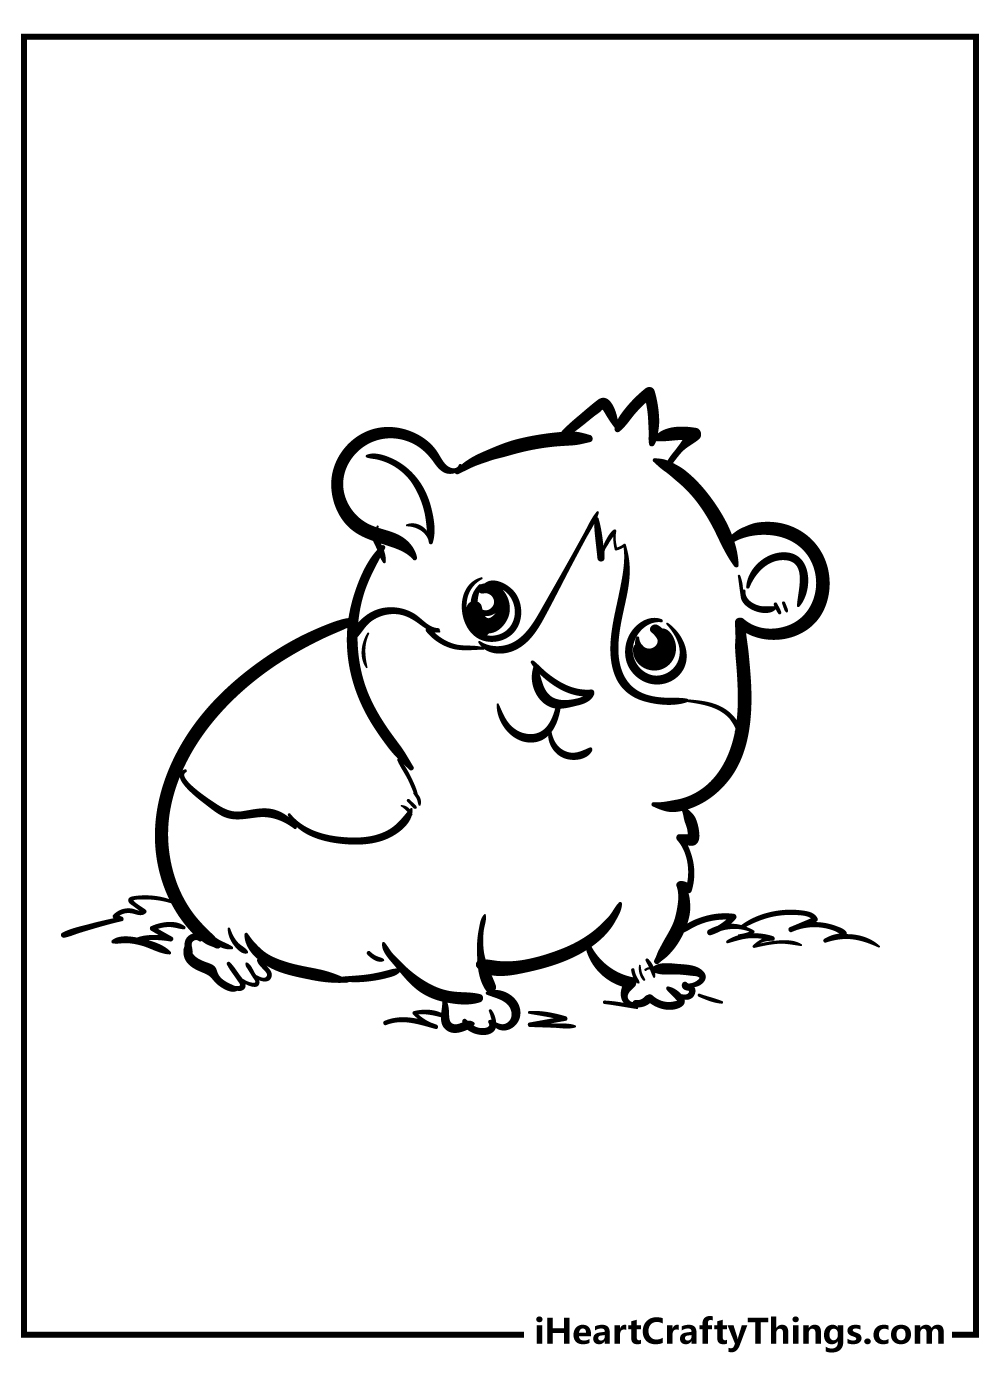 Printable Hamster Coloring Pages Updated 20